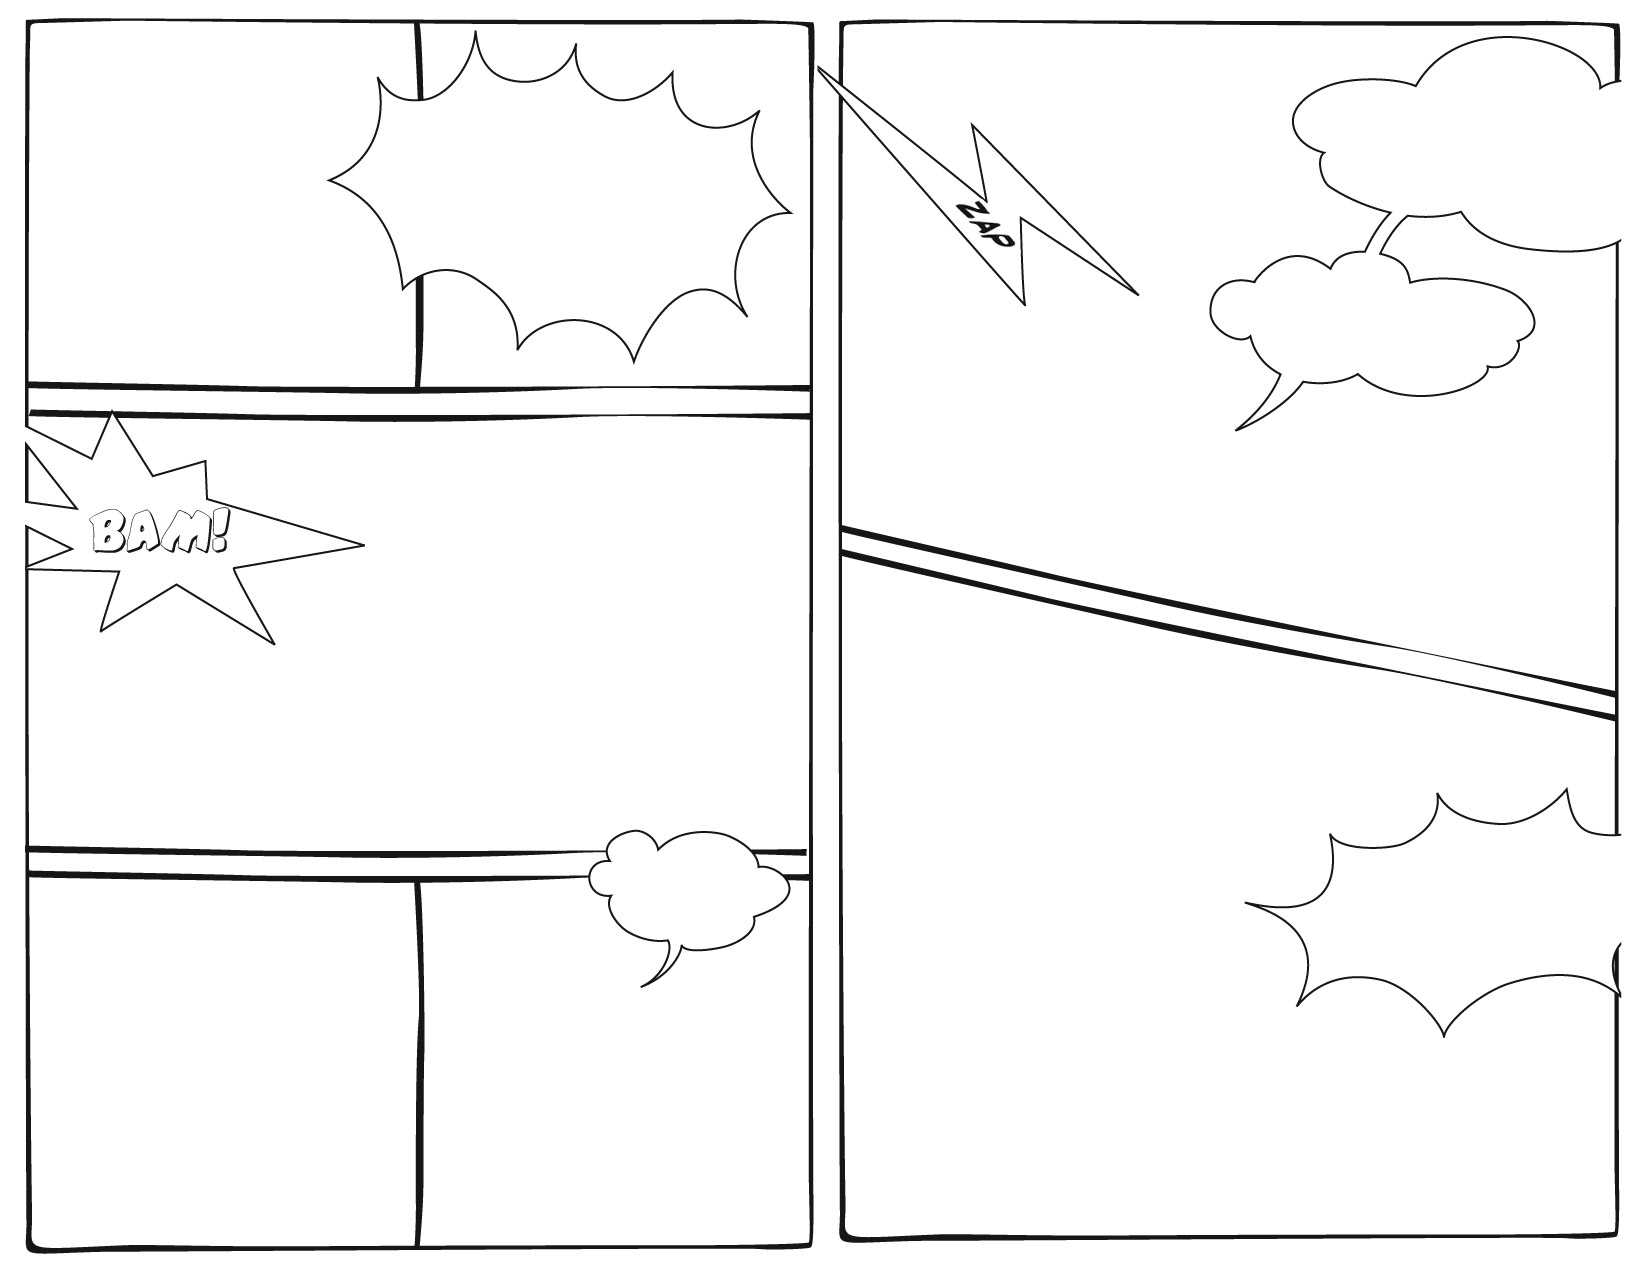 7 Best Images Of Printable Comic Book Layout Template In Printable Blank Comic Strip Template For Kids